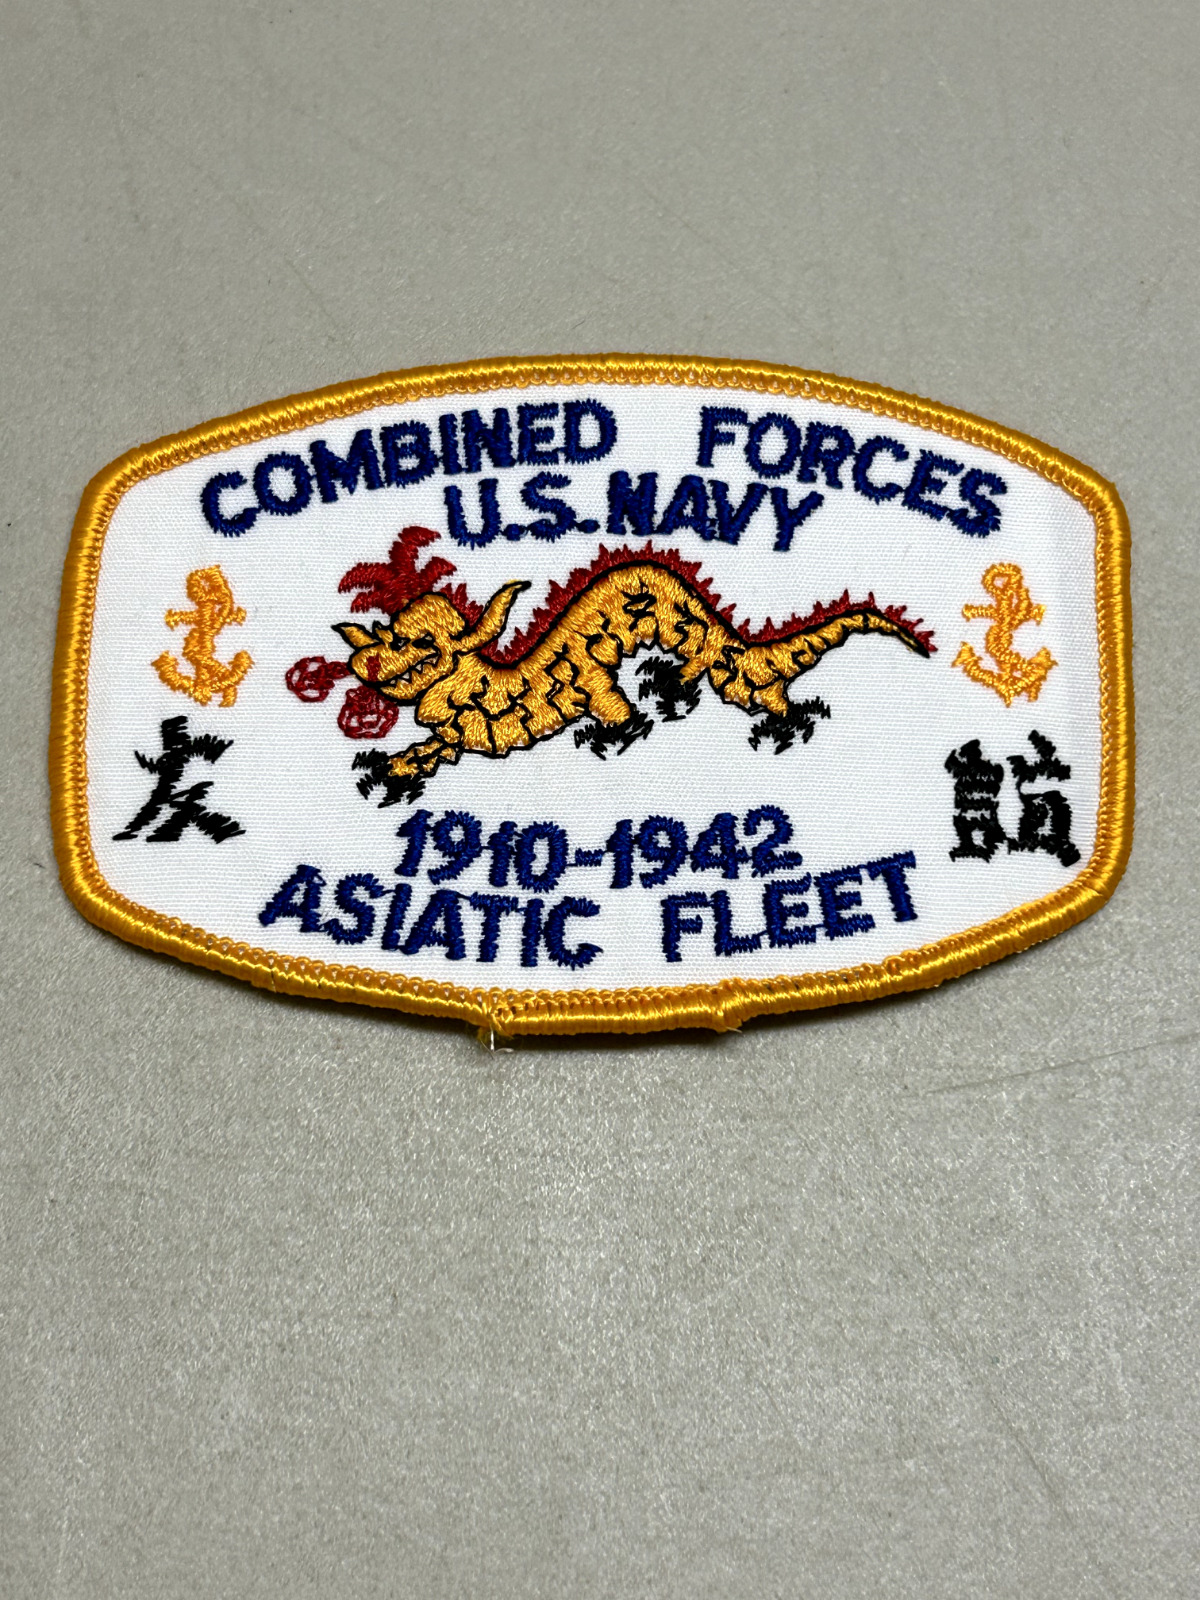 US Navy Combined Forces Patch 1910 1942 Asiatic Fleet Repro Modern Military